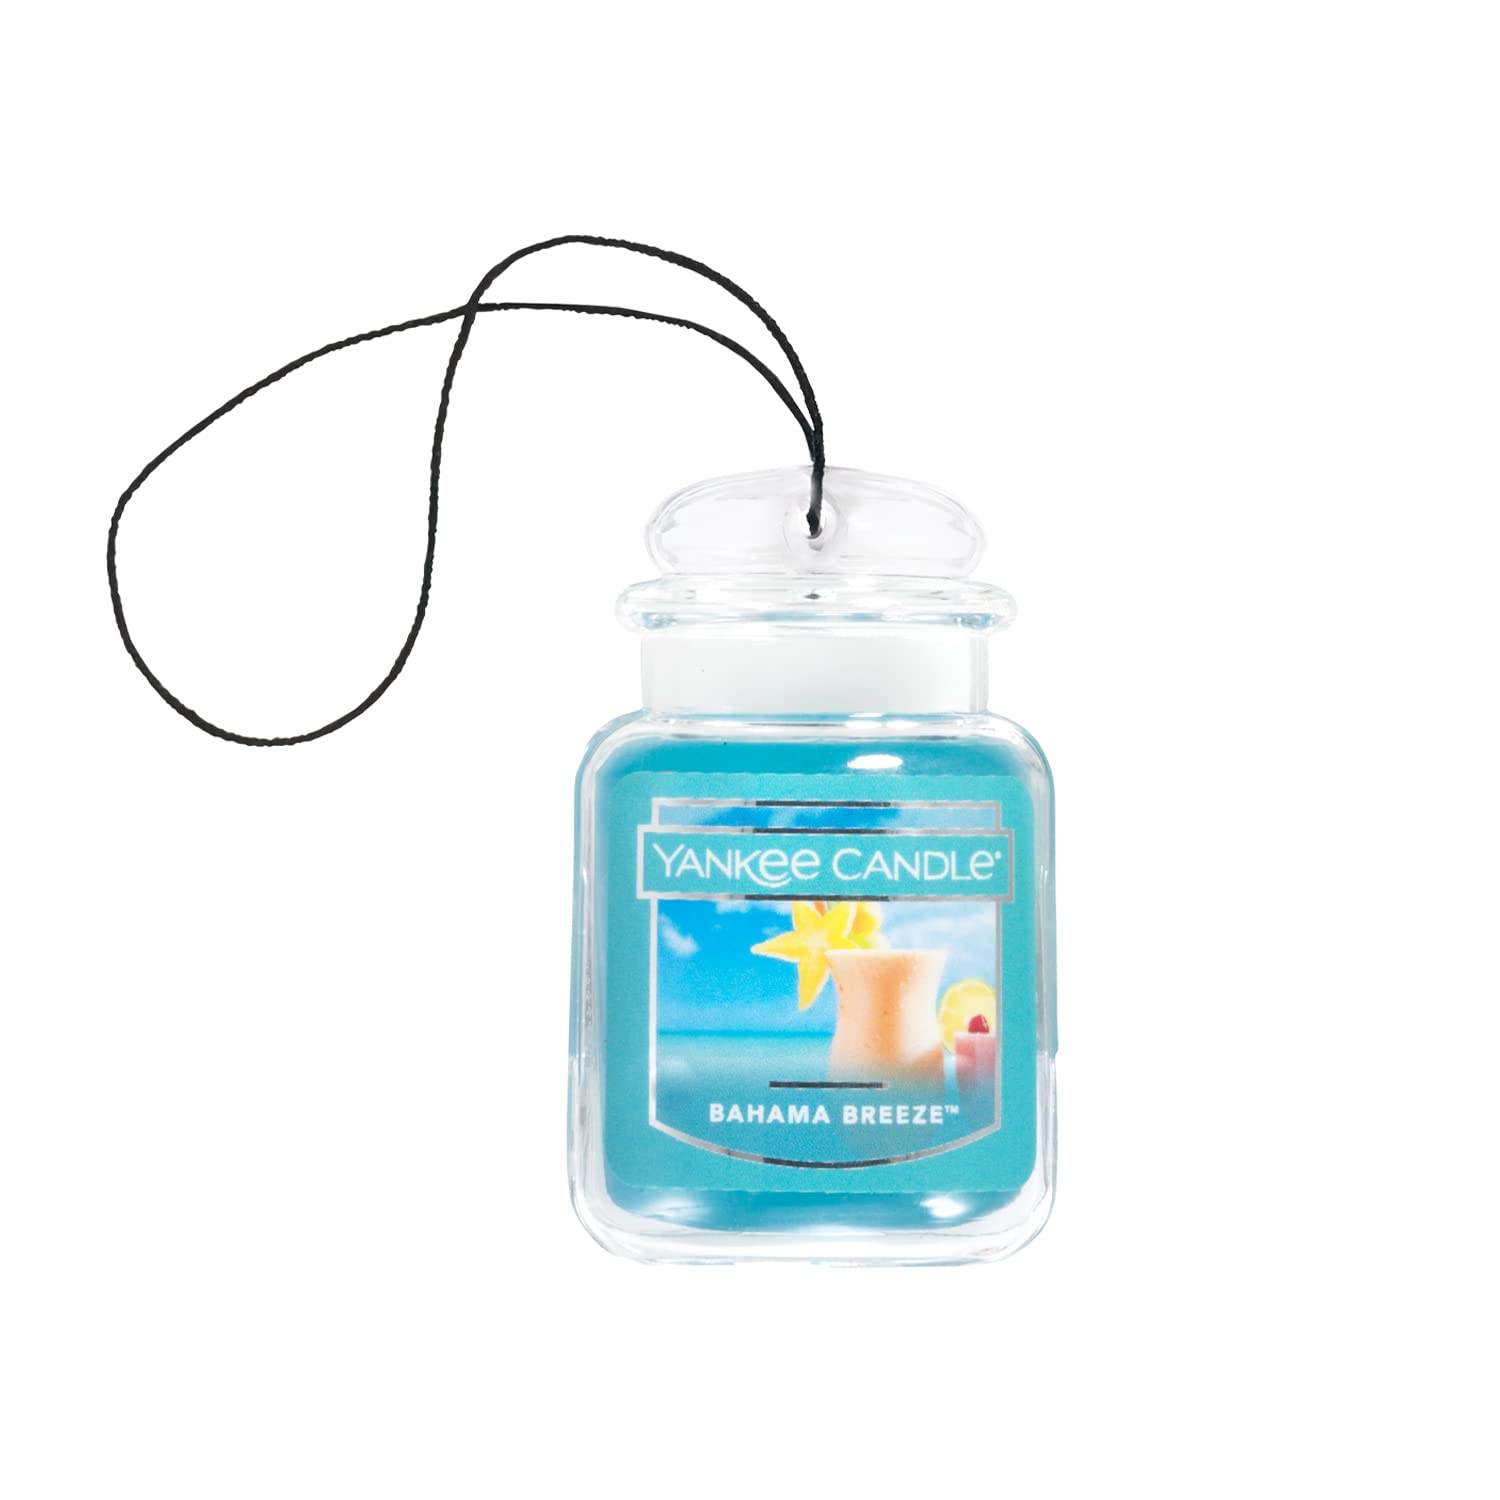 Yankee Candle Car Air Fresheners, Hanging Car Jar® Ultimate Bahama Breeze™ Scented, Neutralizes Odors Up To 30 Days